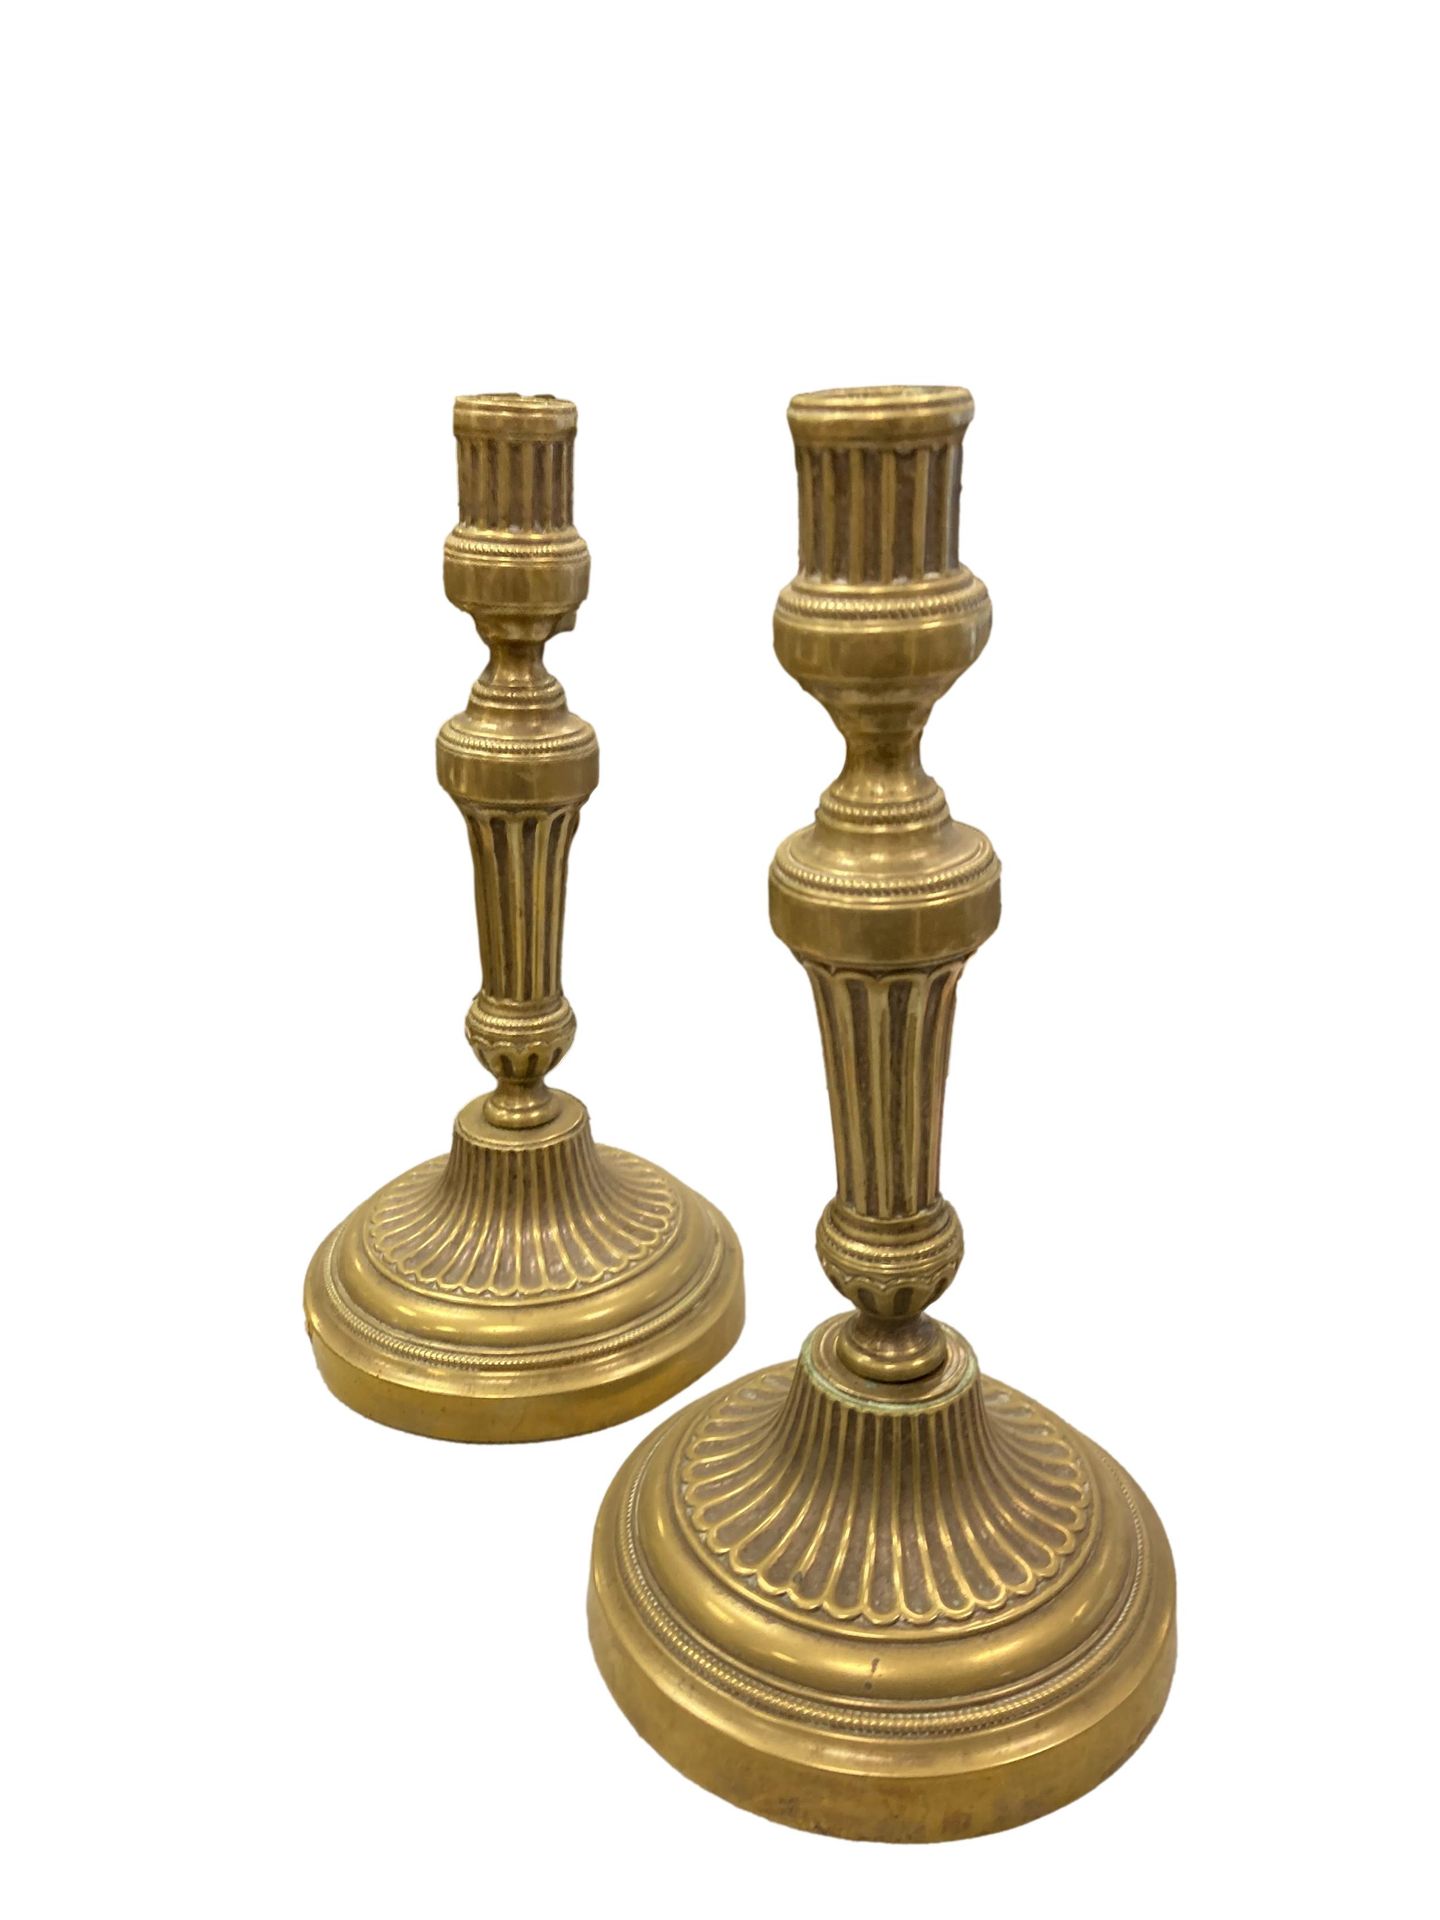 Null Pair of ormolu candlesticks with flutes

H. 27 cm